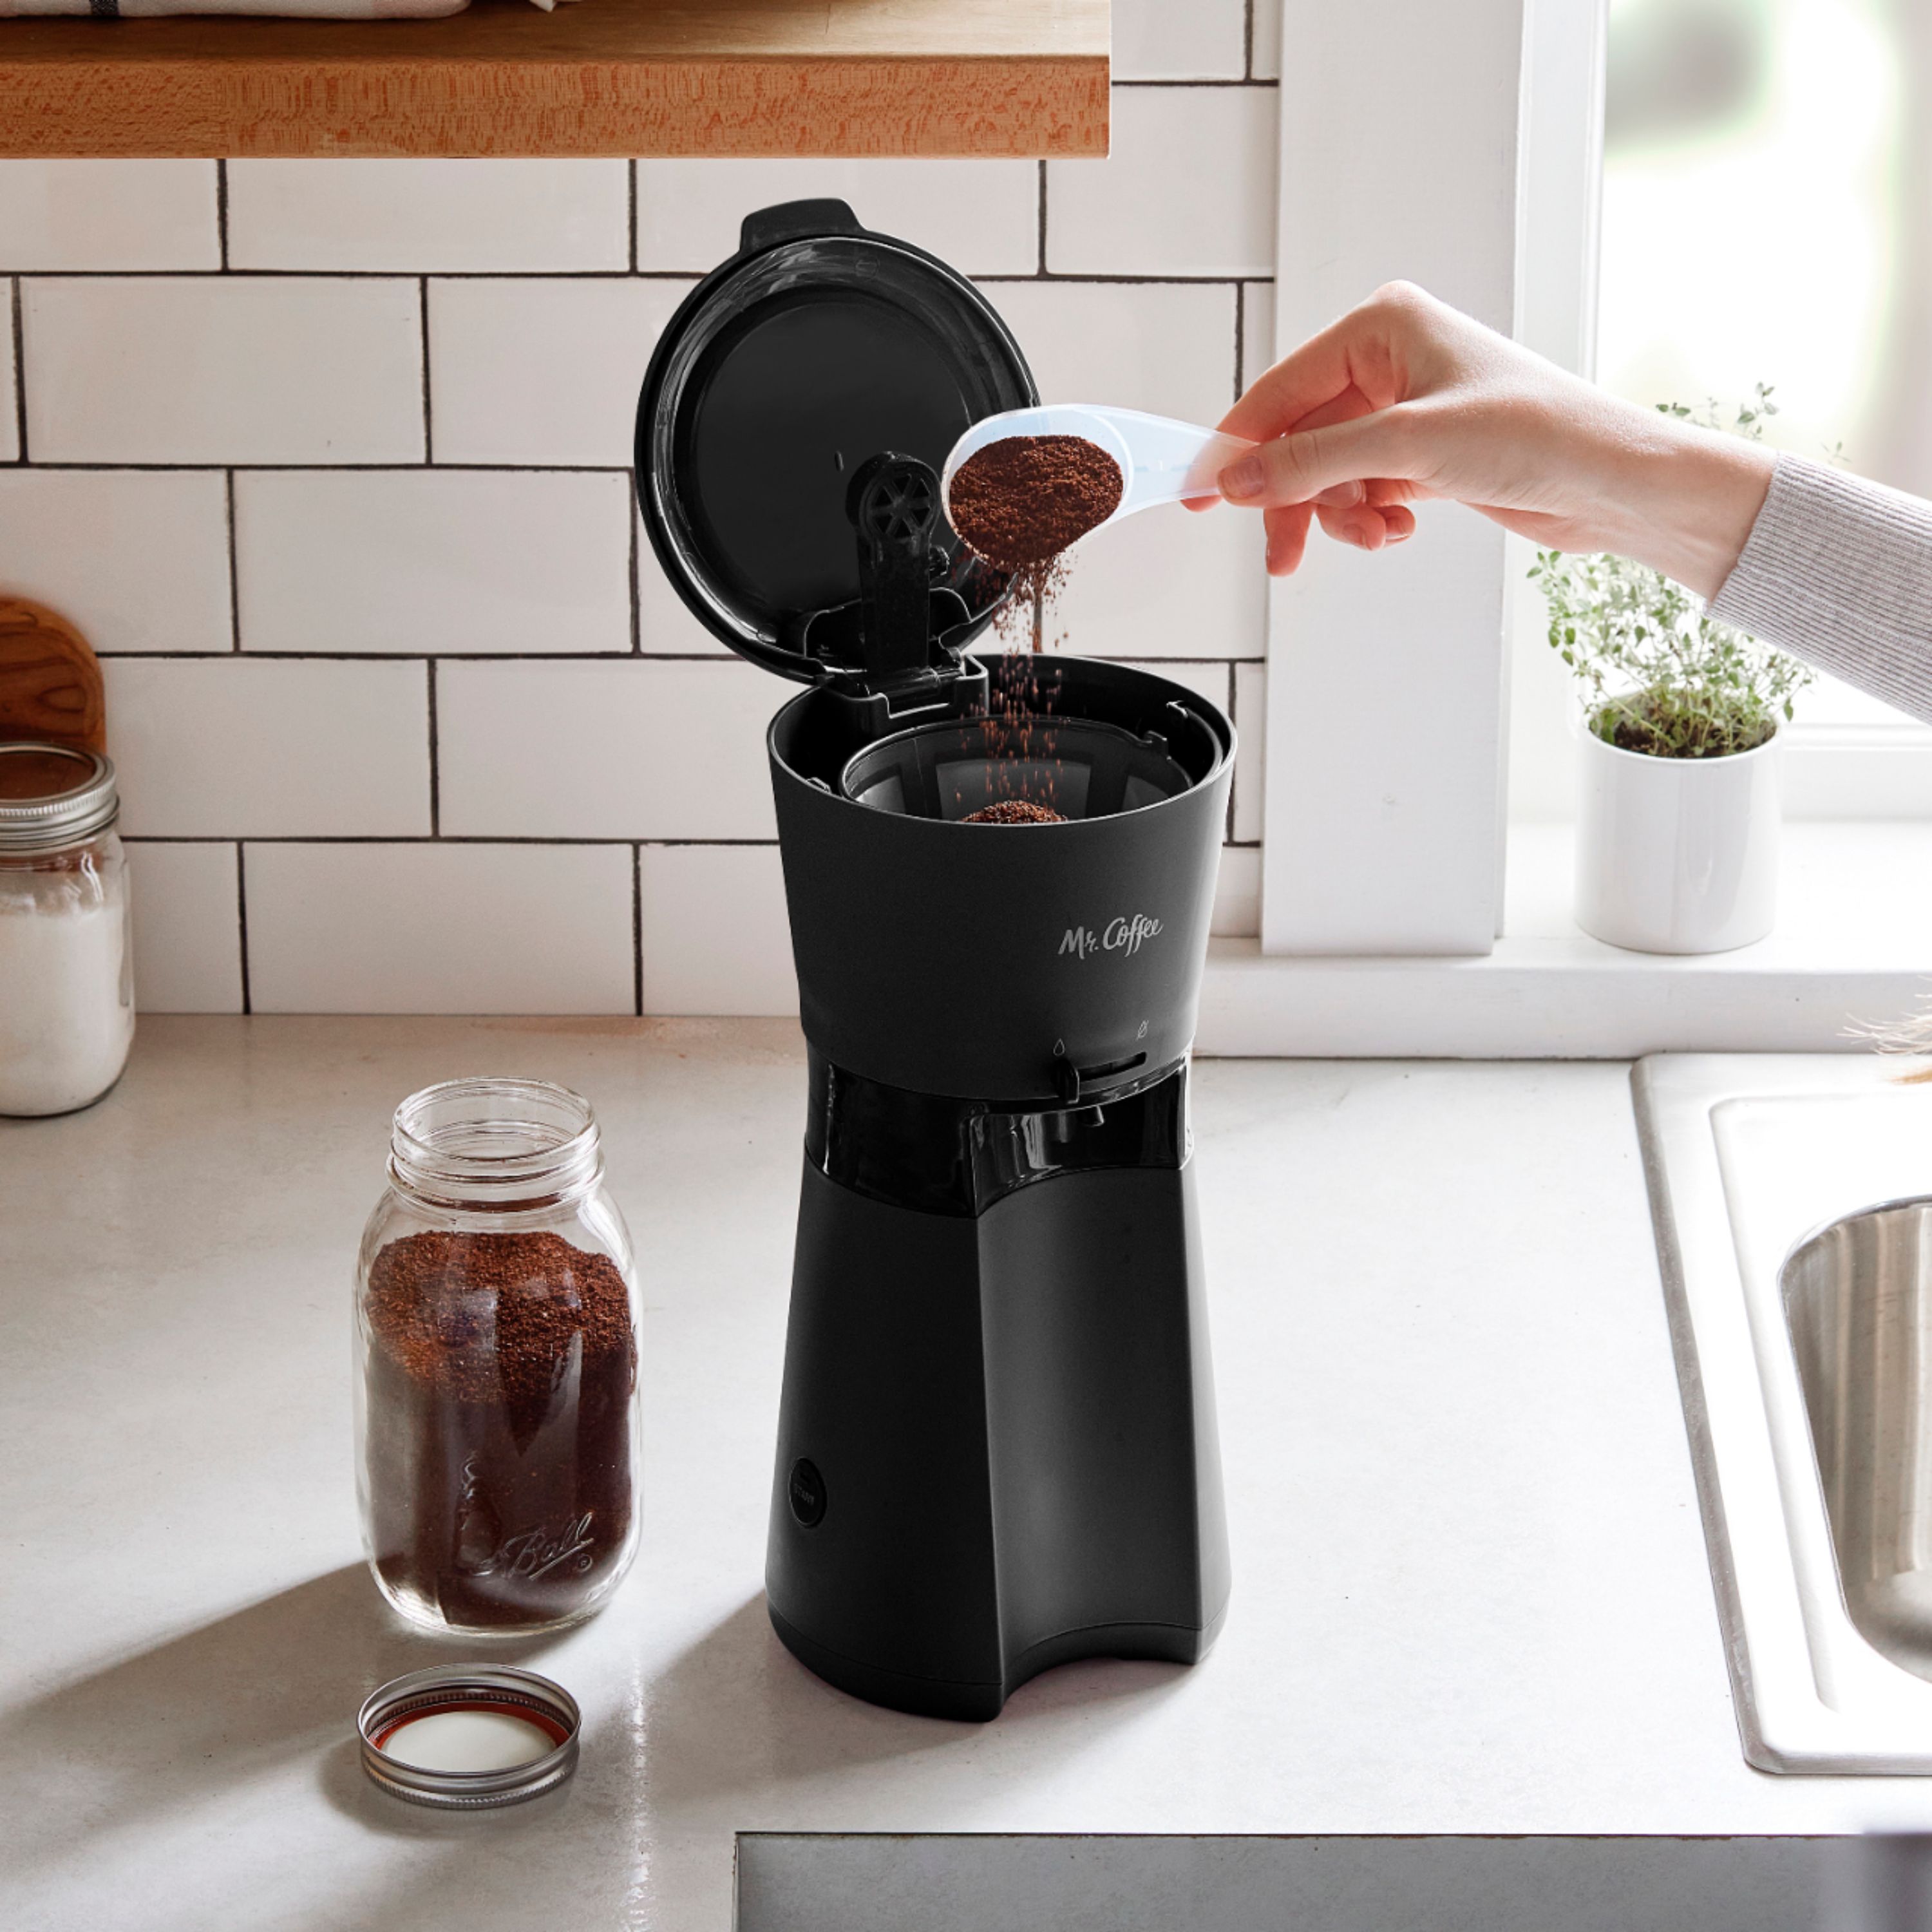 NEW Black Mr Coffee Iced Coffee Maker with Reusable Tumbler and Coffee Filter 